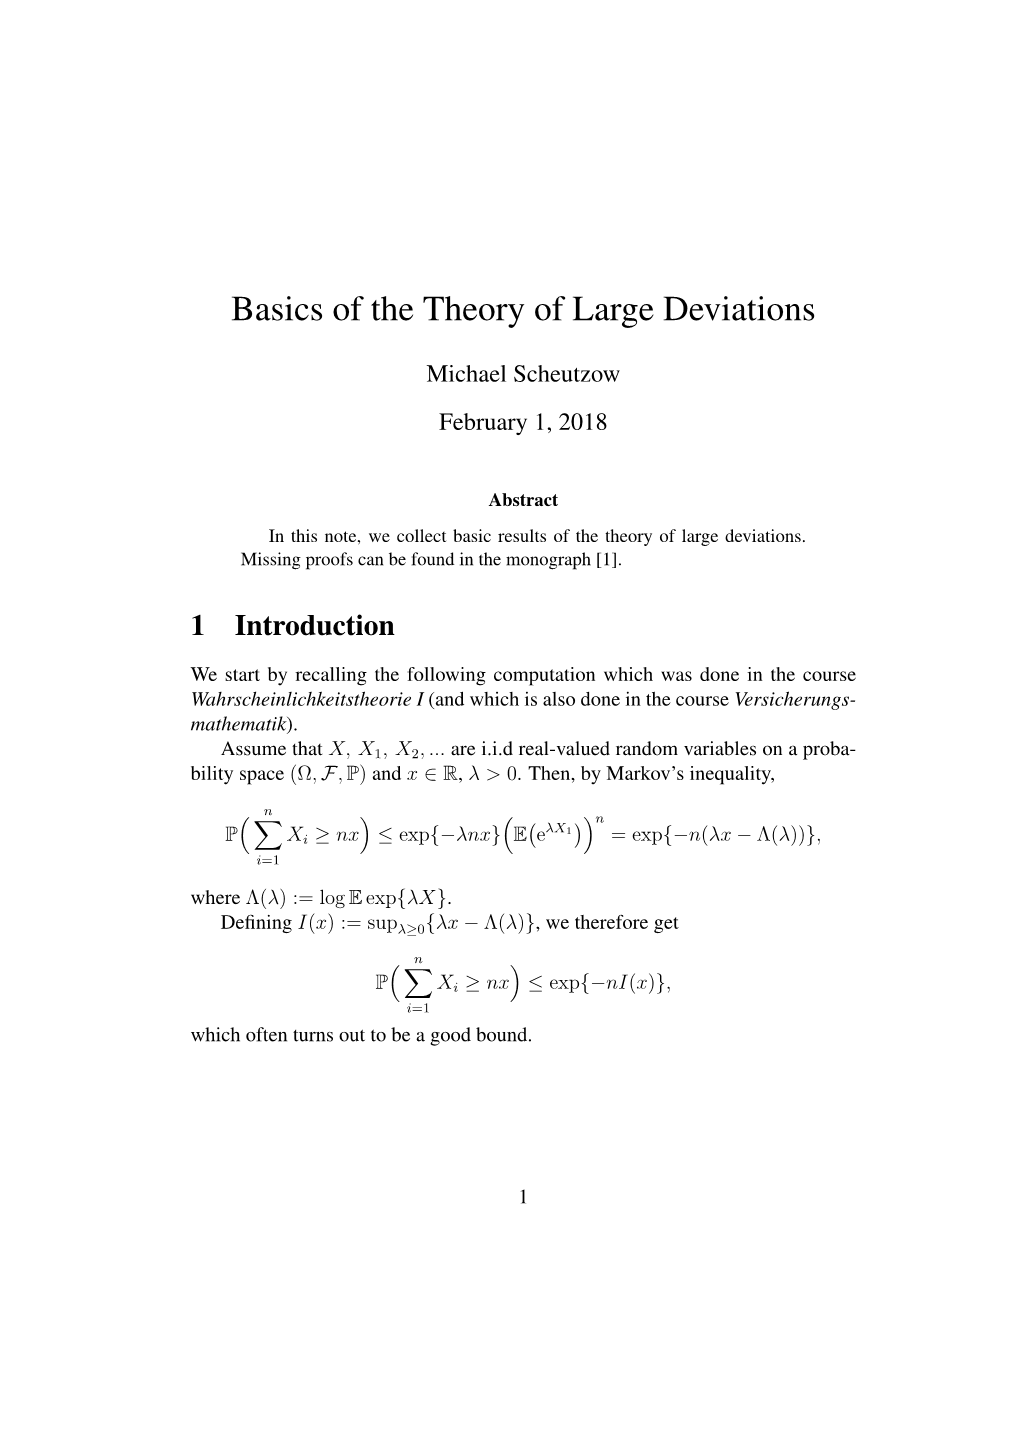 Basics of the Theory of Large Deviations